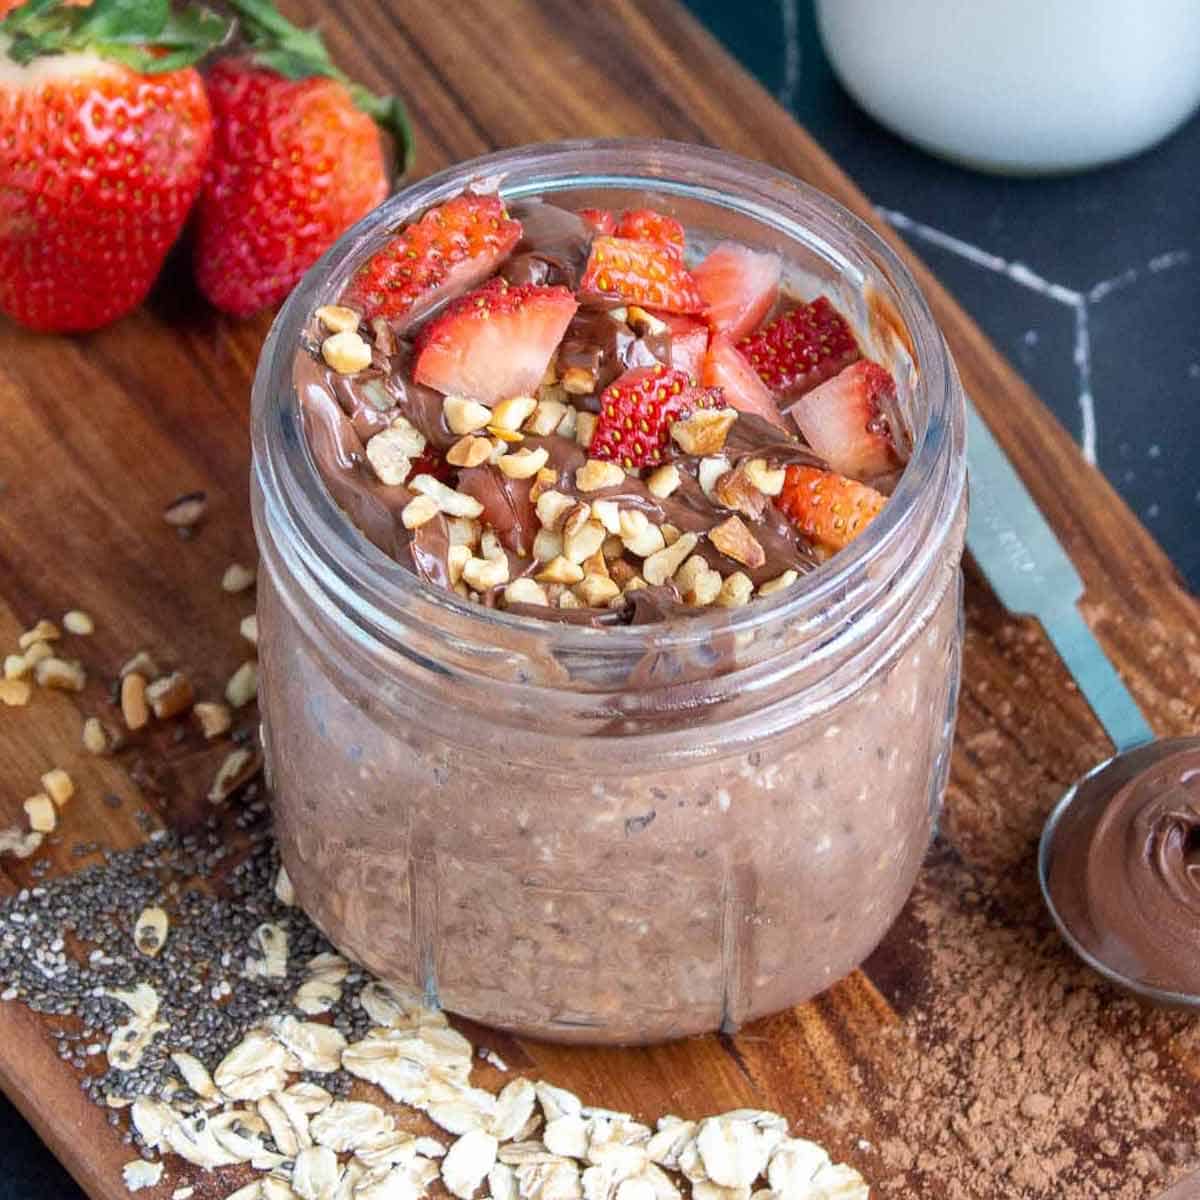 Nutella overnight oats in a mason jar topped with strawberries, Nutella, and hazelnuts.